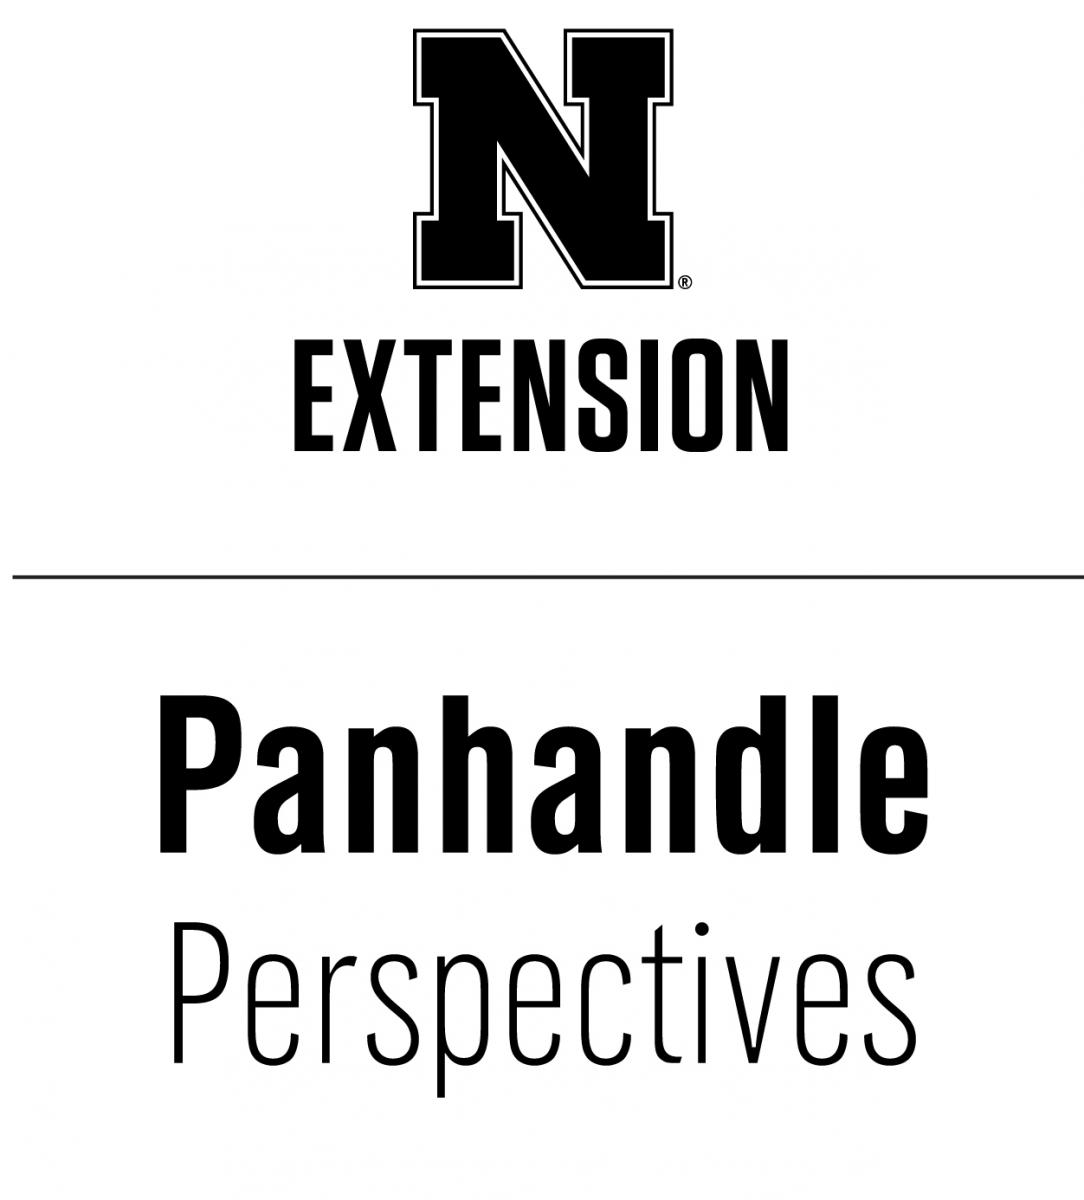 Panhandle Perspectives